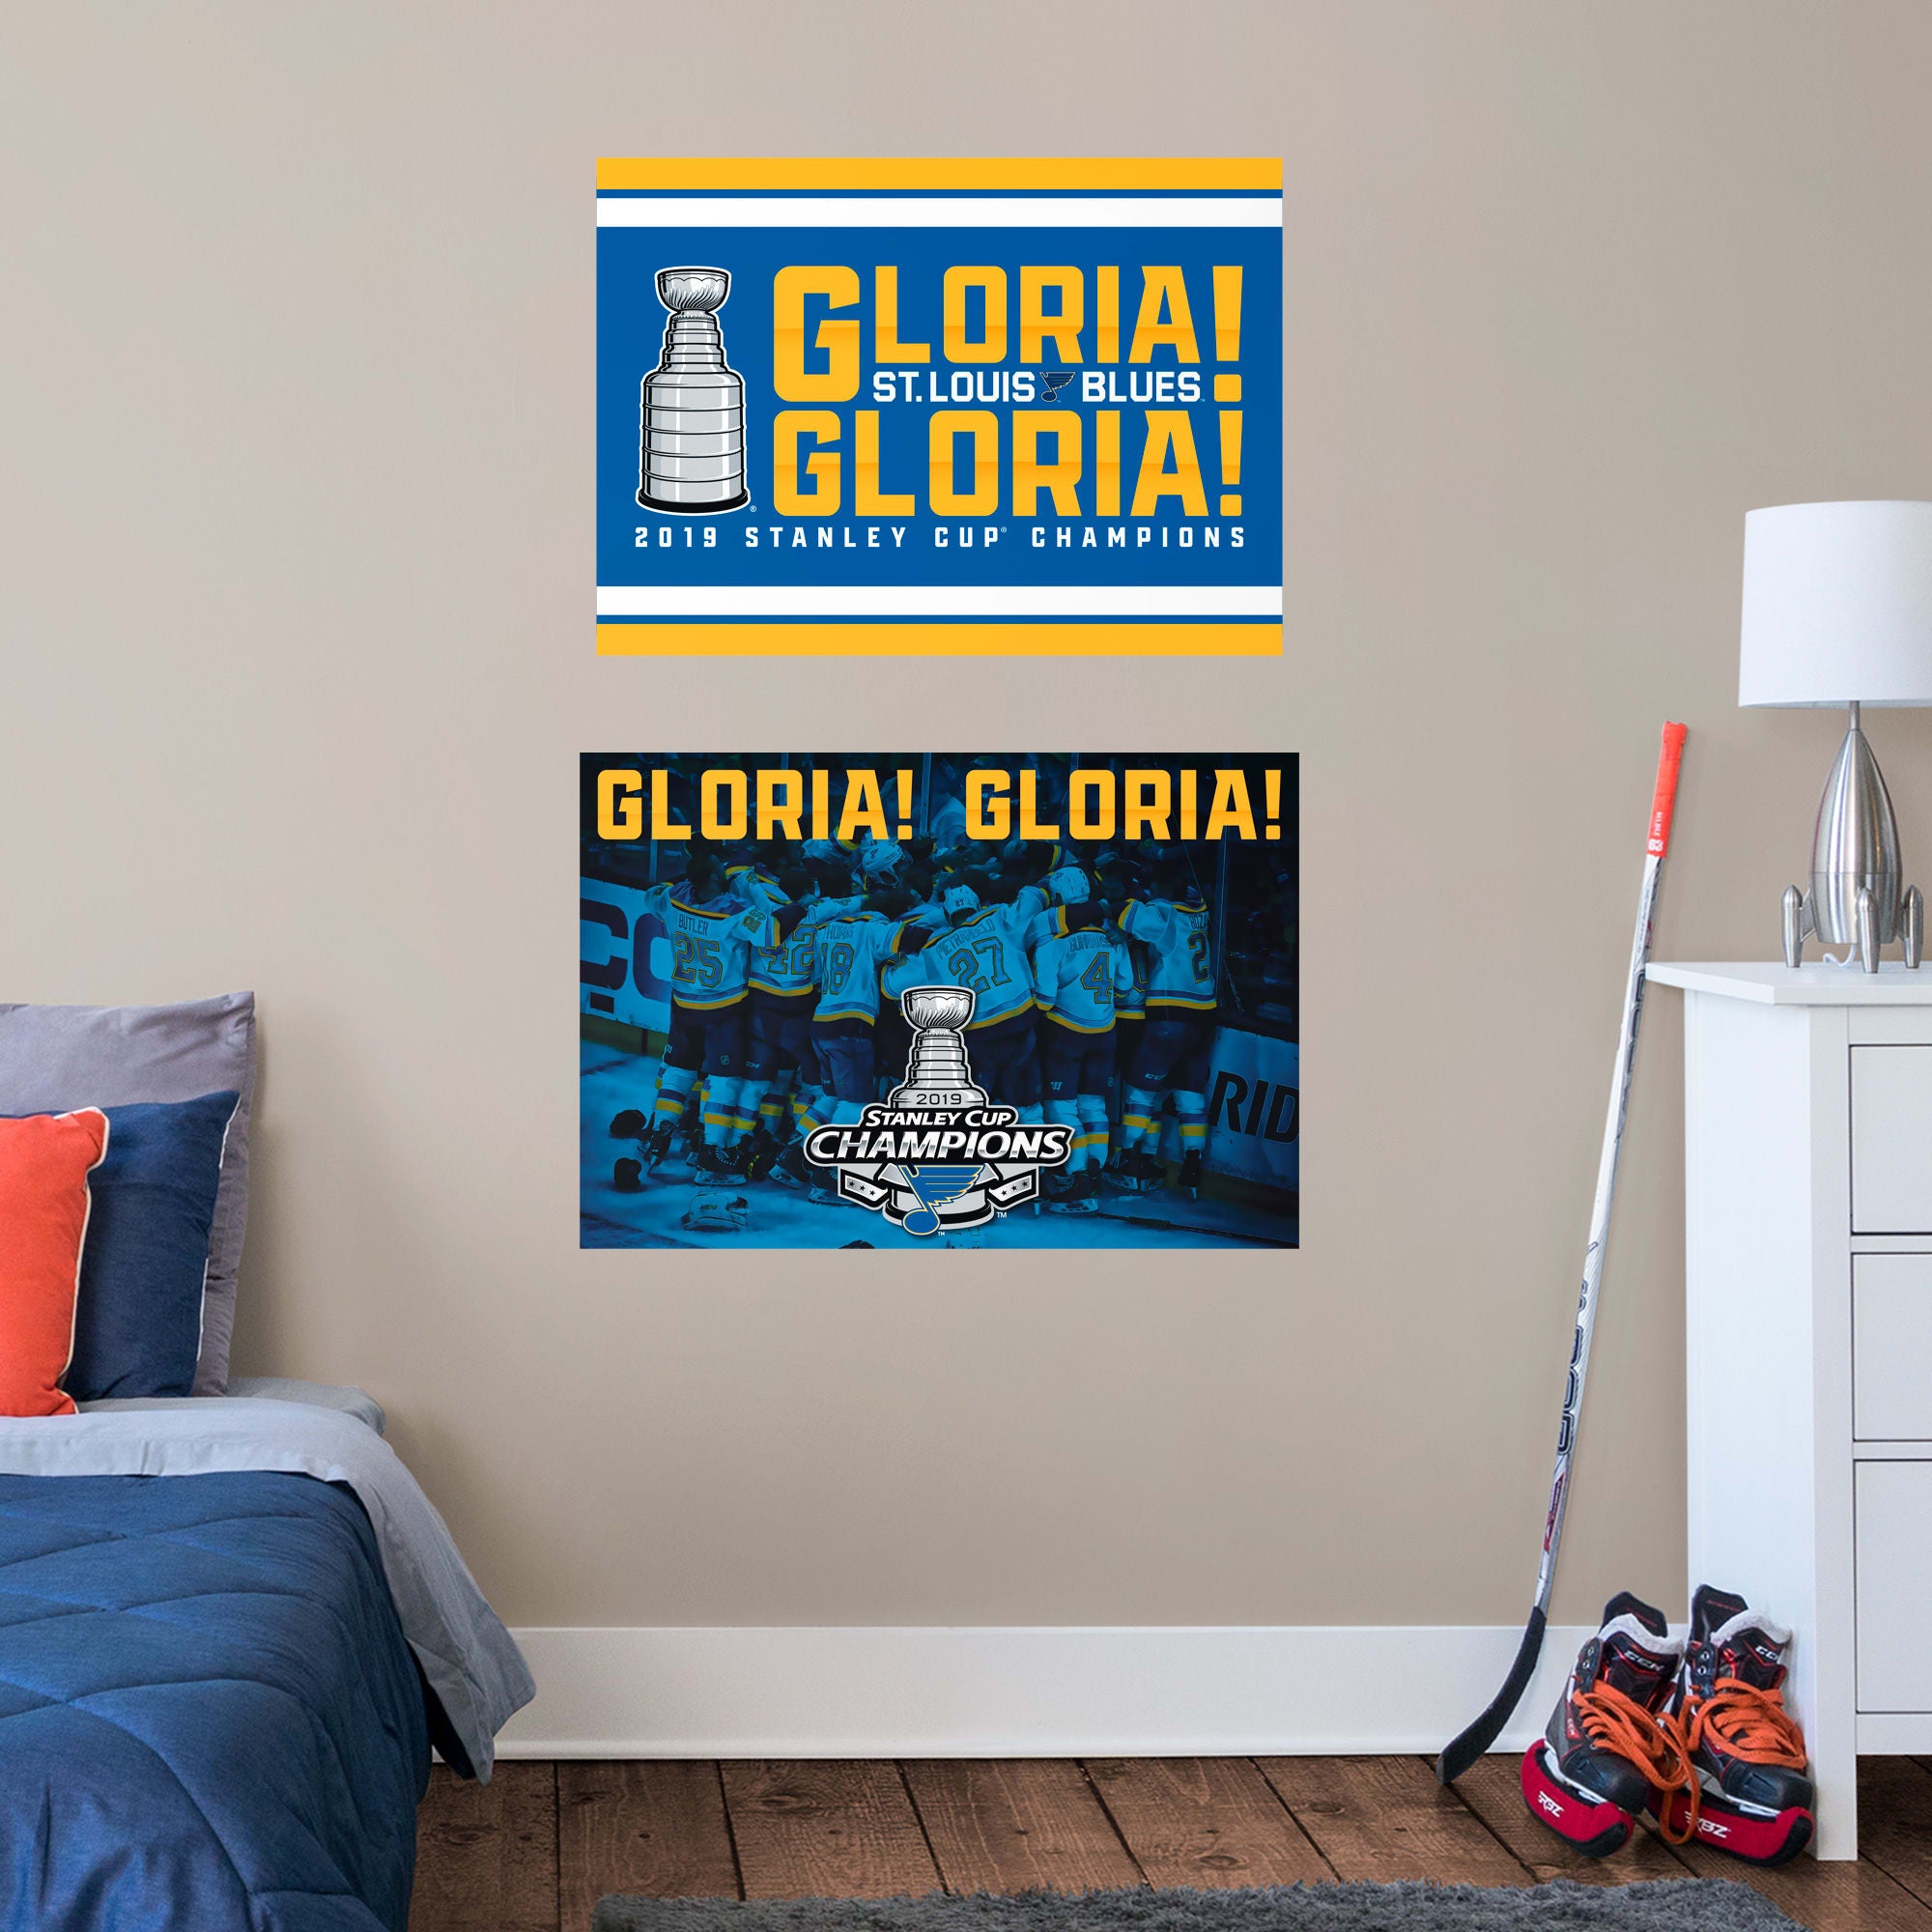 St. Louis Blues: Gloria 2019 Stanley Cup Champions Collection - Officially Licensed NHL Removable Wall Decal 34.0"W x 24.0"H b